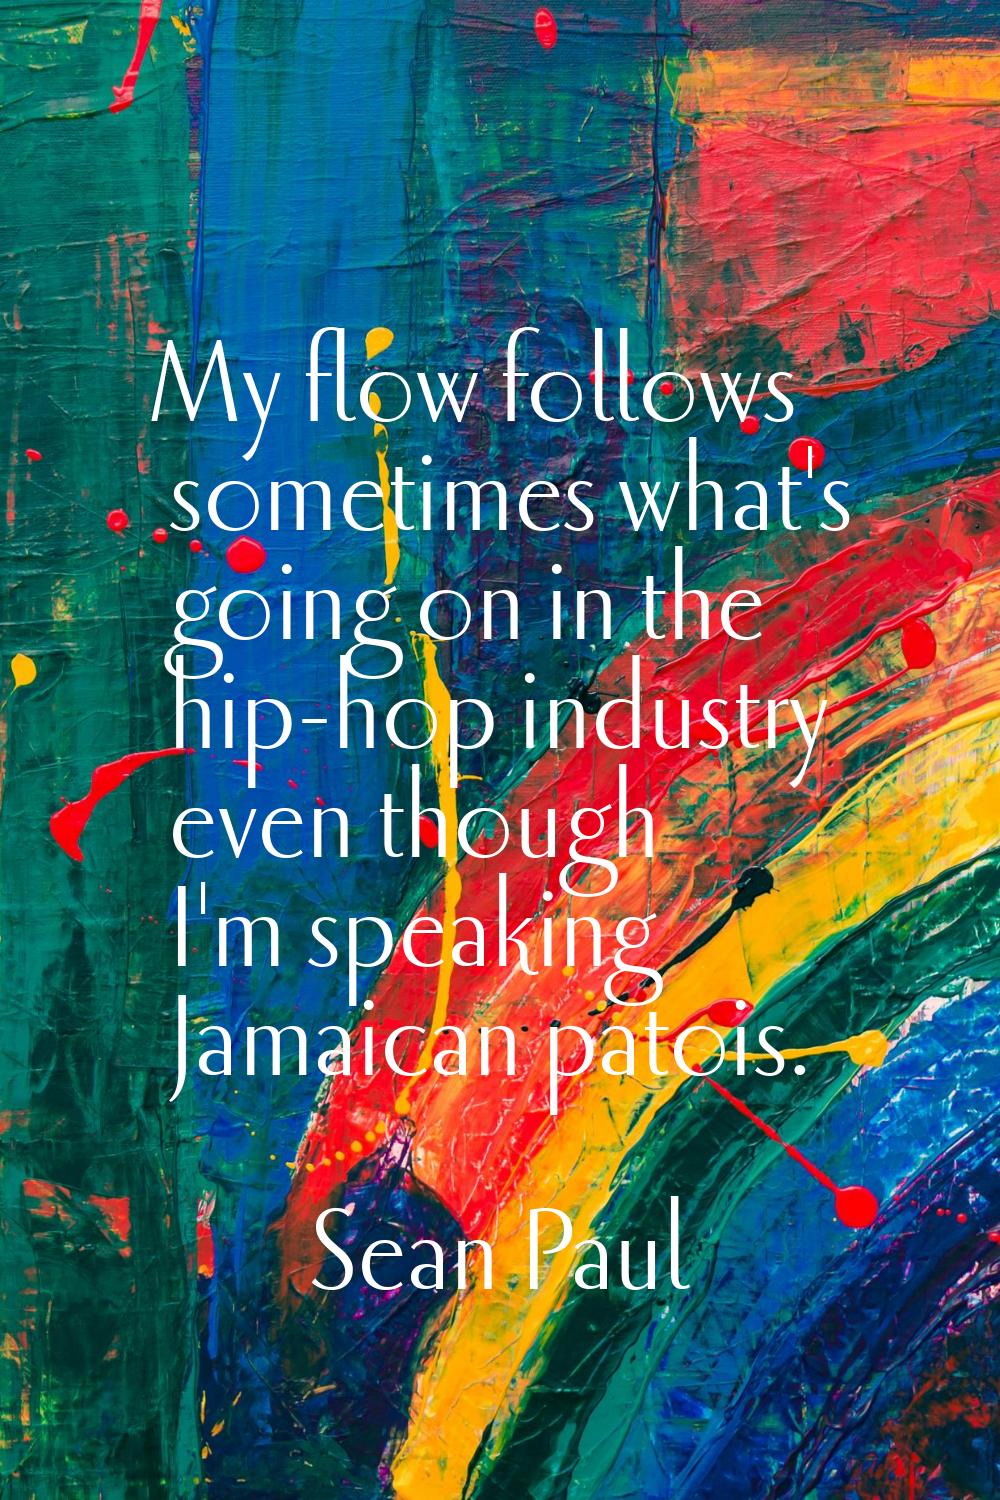 My flow follows sometimes what's going on in the hip-hop industry even though I'm speaking Jamaican